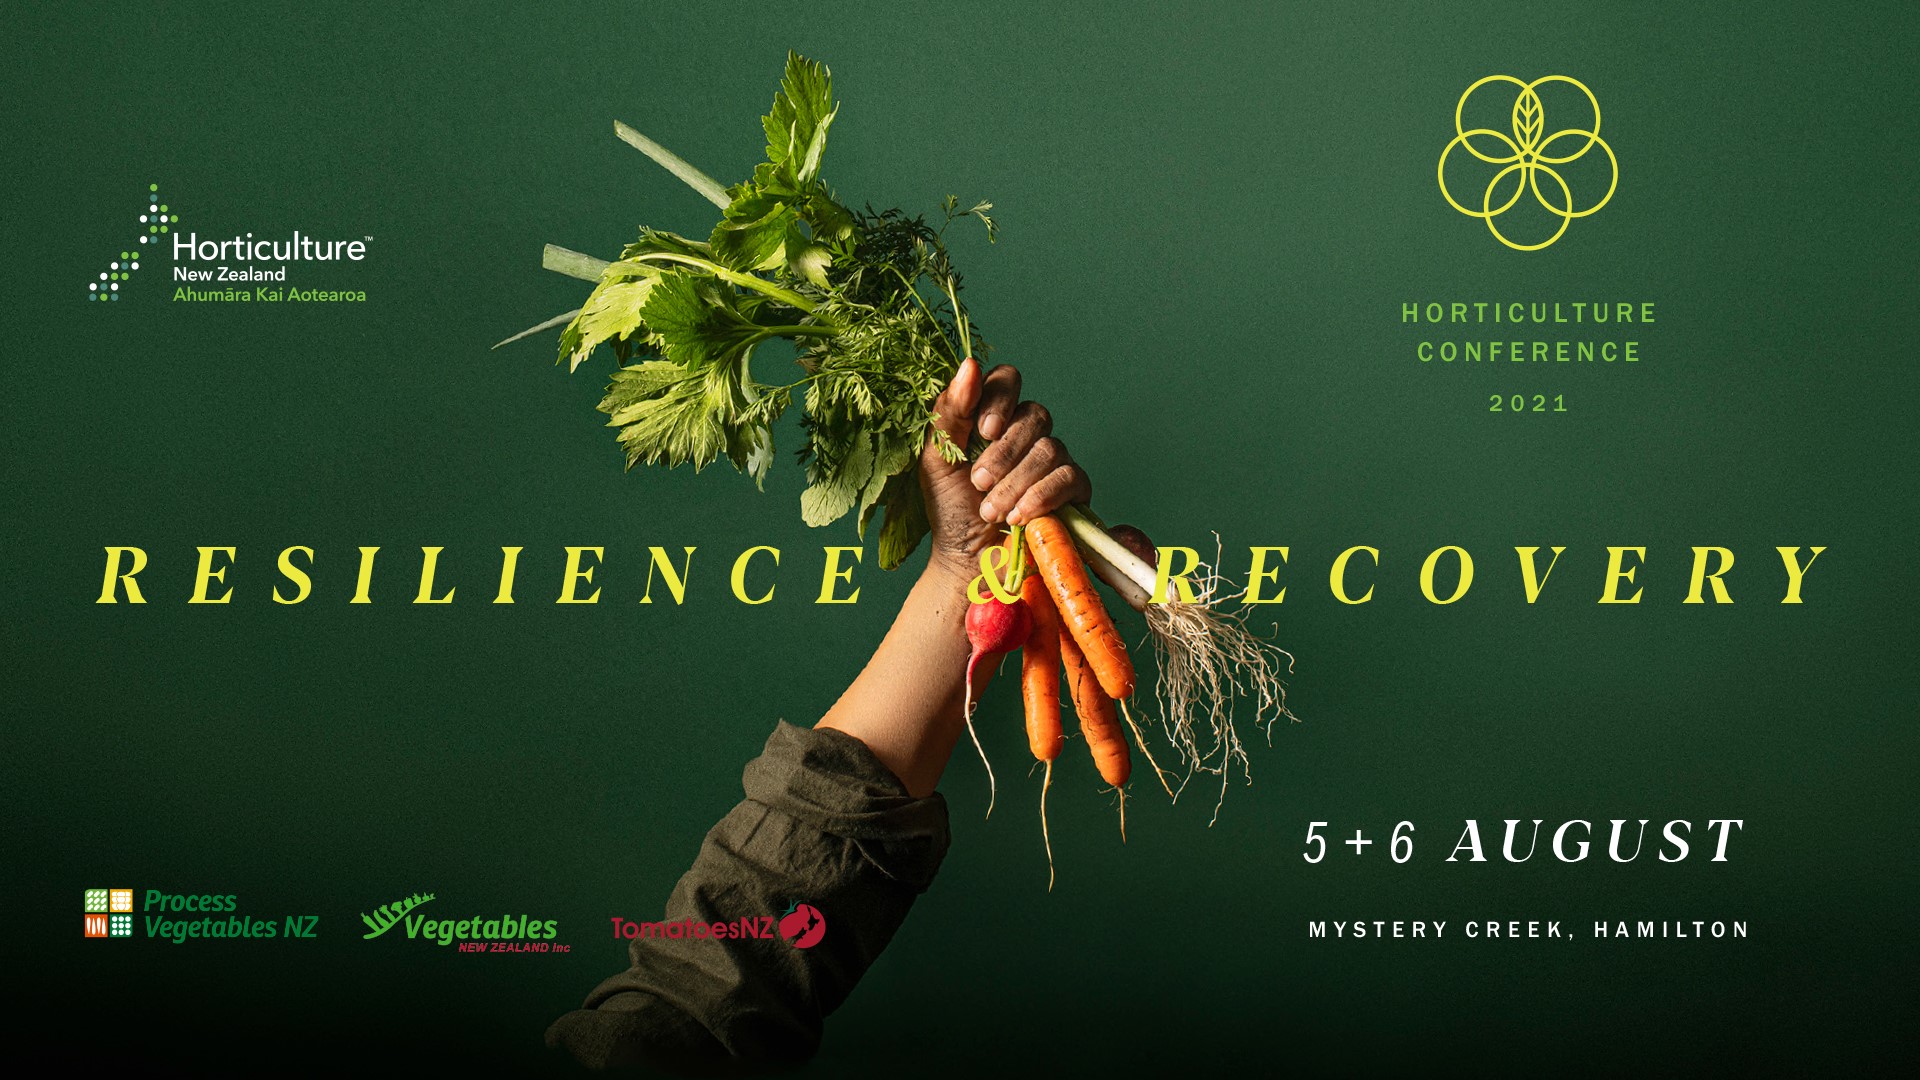 Horticulture Conference 2021 register now before early registration